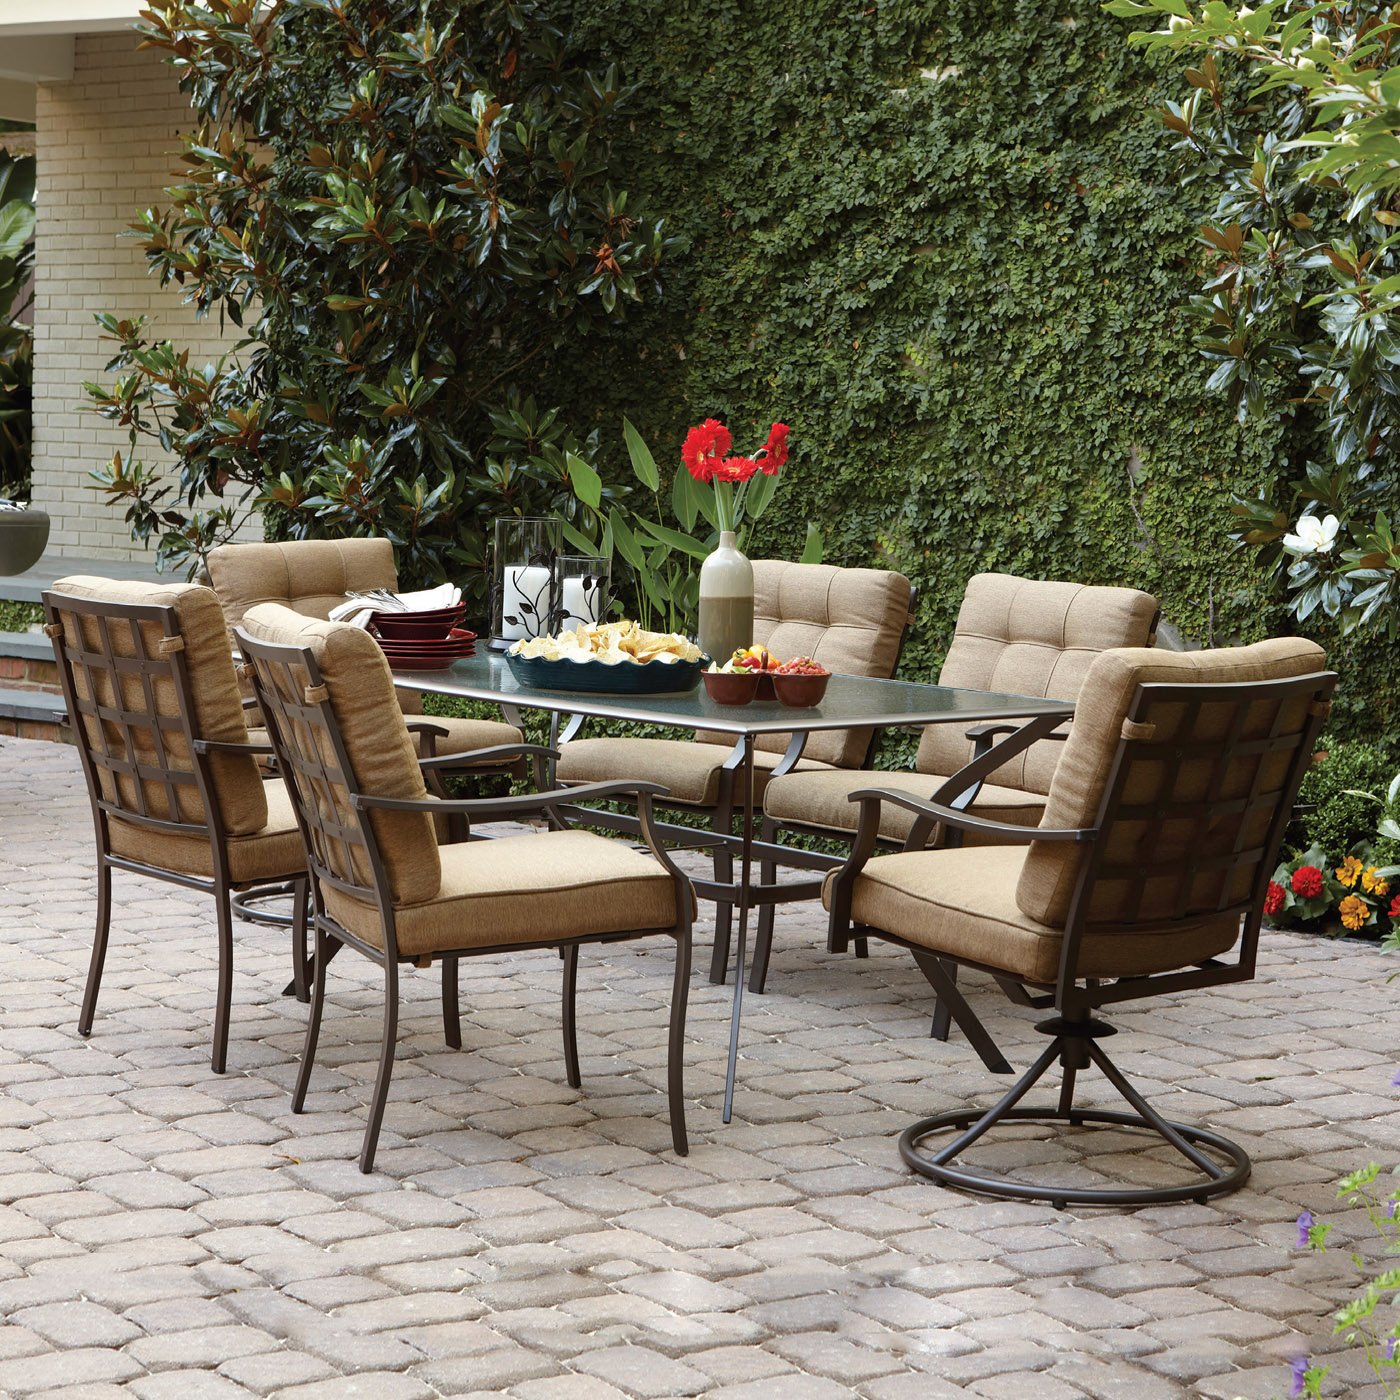 patio dining sets lowes photo - 1